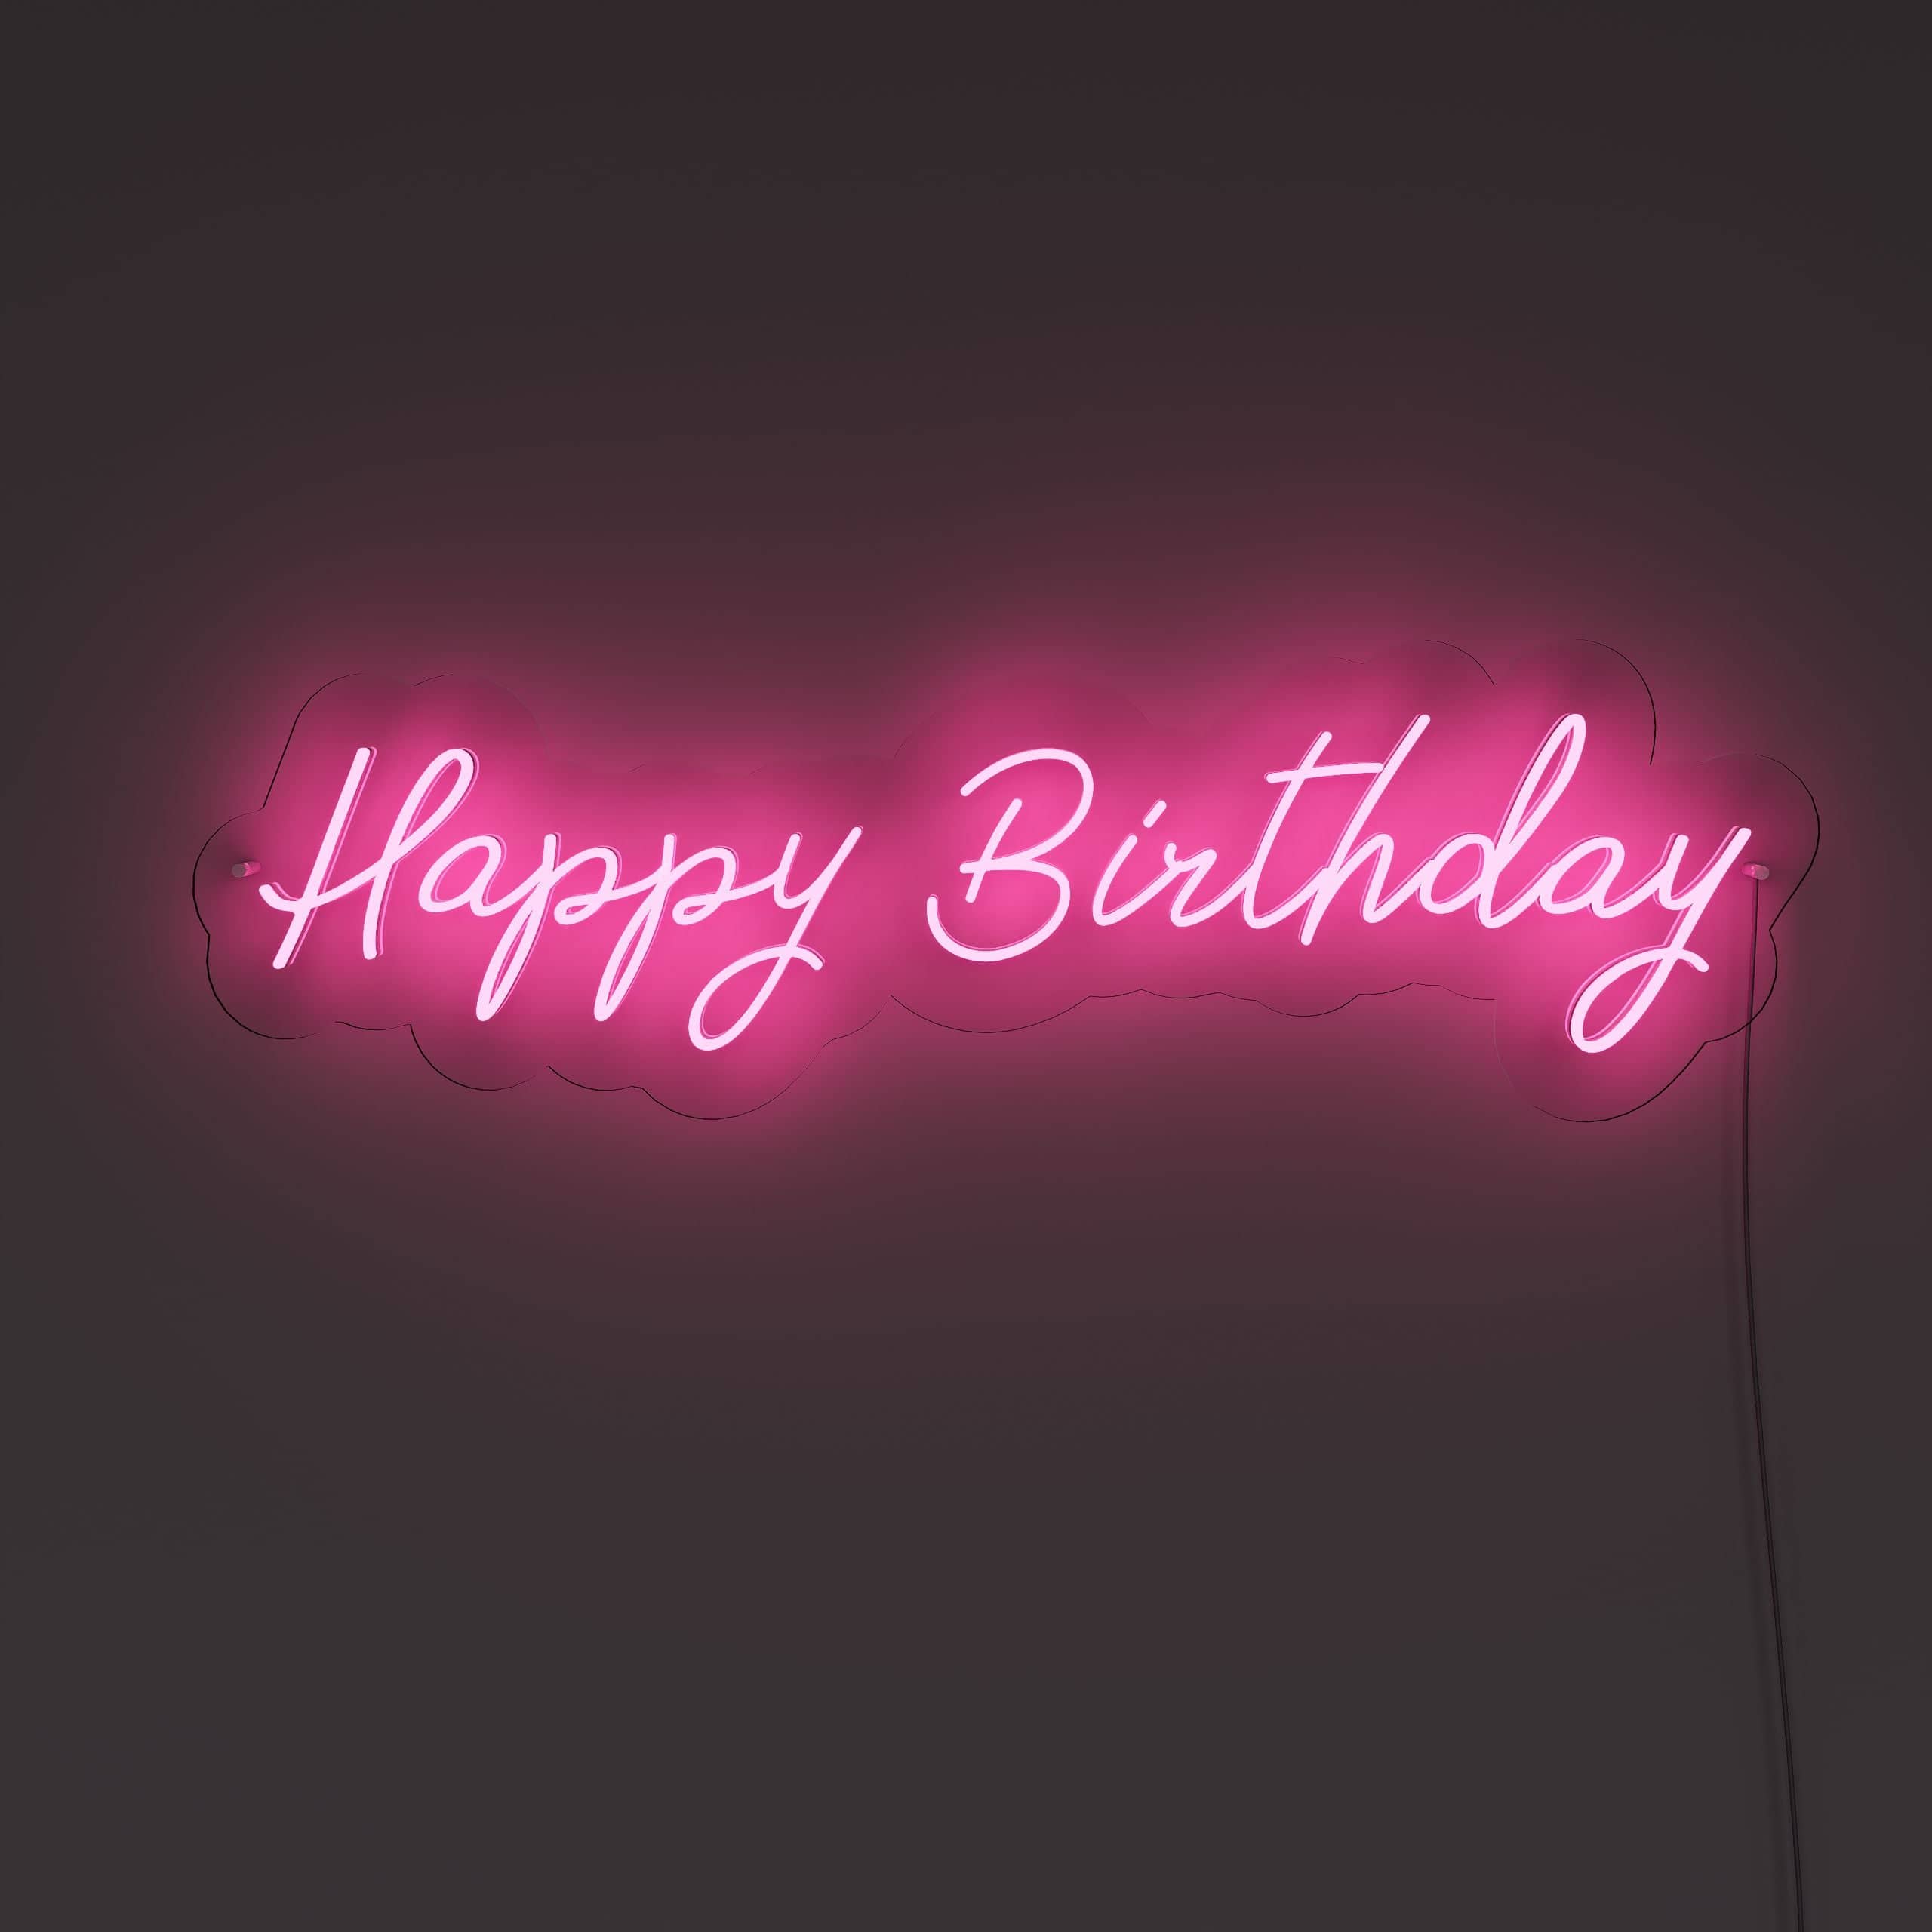 neon-lights-for-a-happy-birthday!-neon-sign-lite